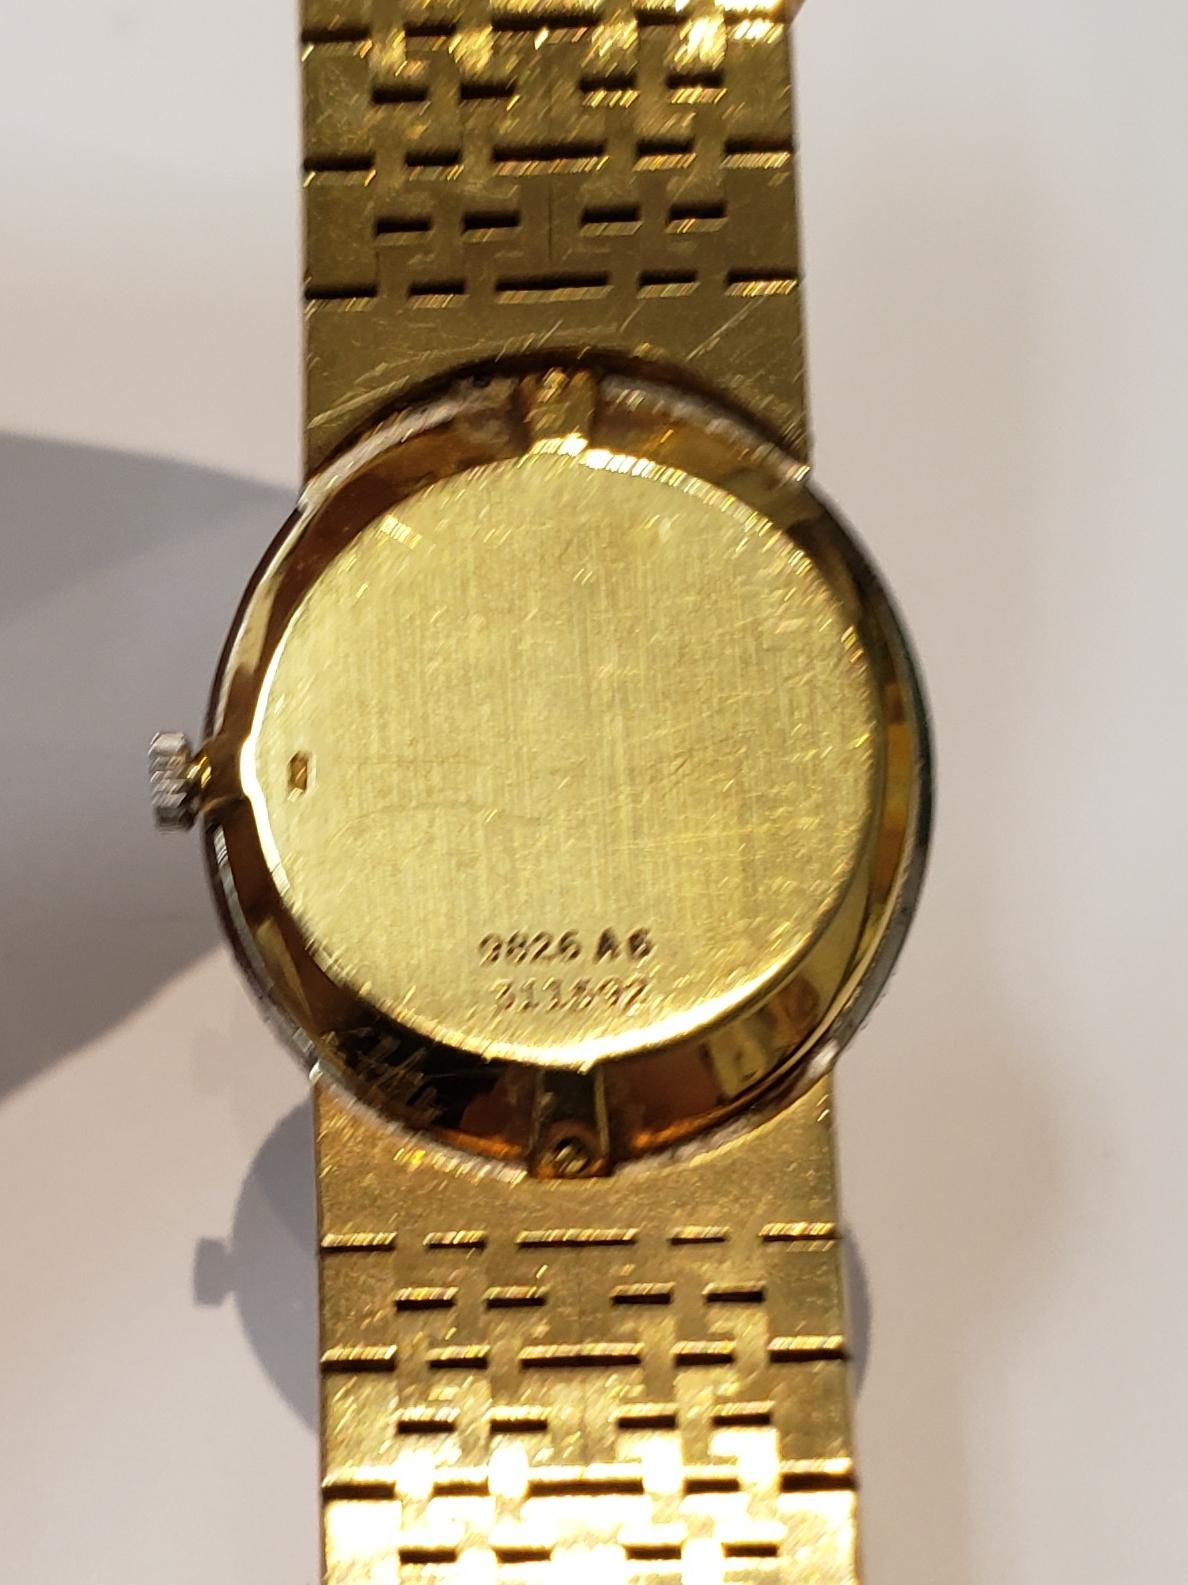 Circa 1980 ladies 18 karat yellow gold Piaget watch with an oval lapis dial. Watch has a diamond bezel and markers, on a textured integrated bracelet. Watch has a manual wind movement. Swiss made. Diamond weight is 1 carat. case is stamped 9826 A6